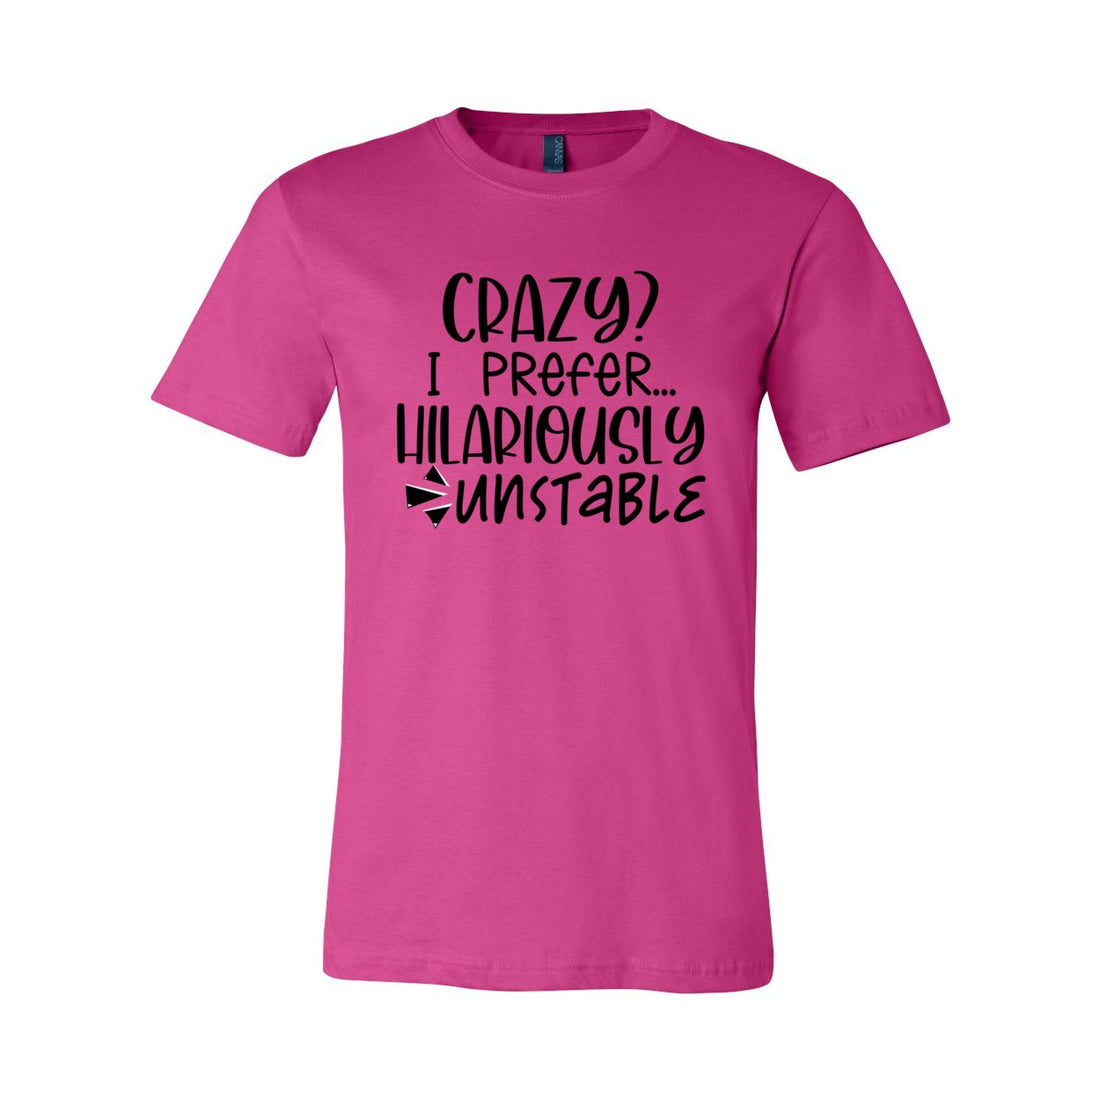 Crazy Jersey Tee - T-Shirts - Positively Sassy - Crazy Jersey Tee